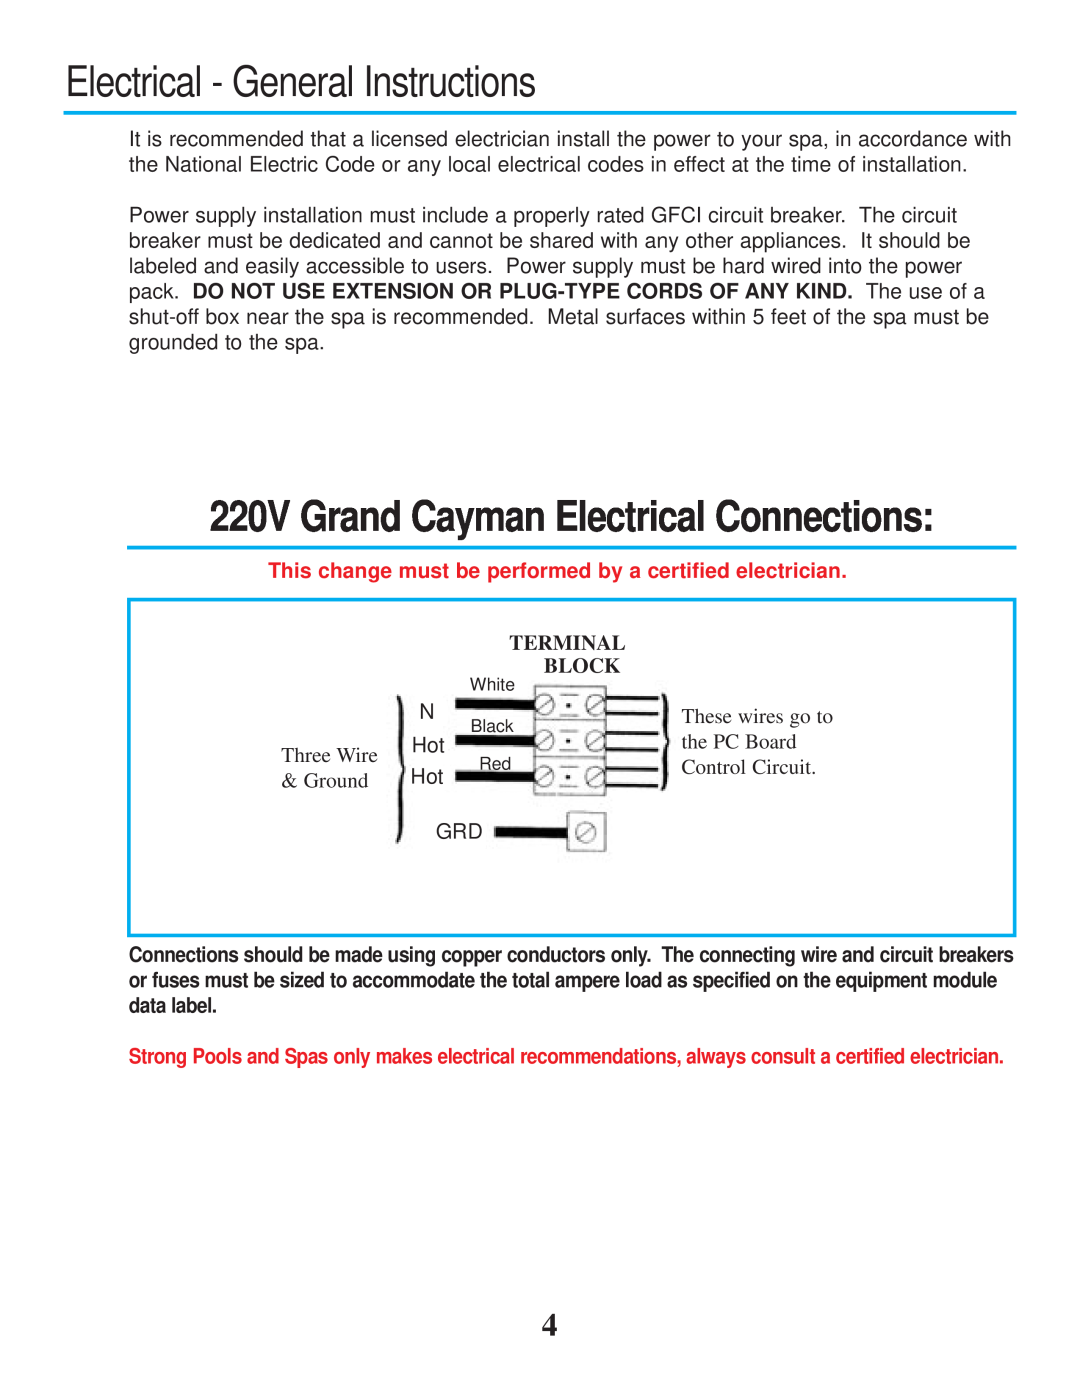 Strong Pools and Spas Grand Cayman Spa Electrical - General Instructions, 220V Grand Cayman Electrical Connections, Ground 